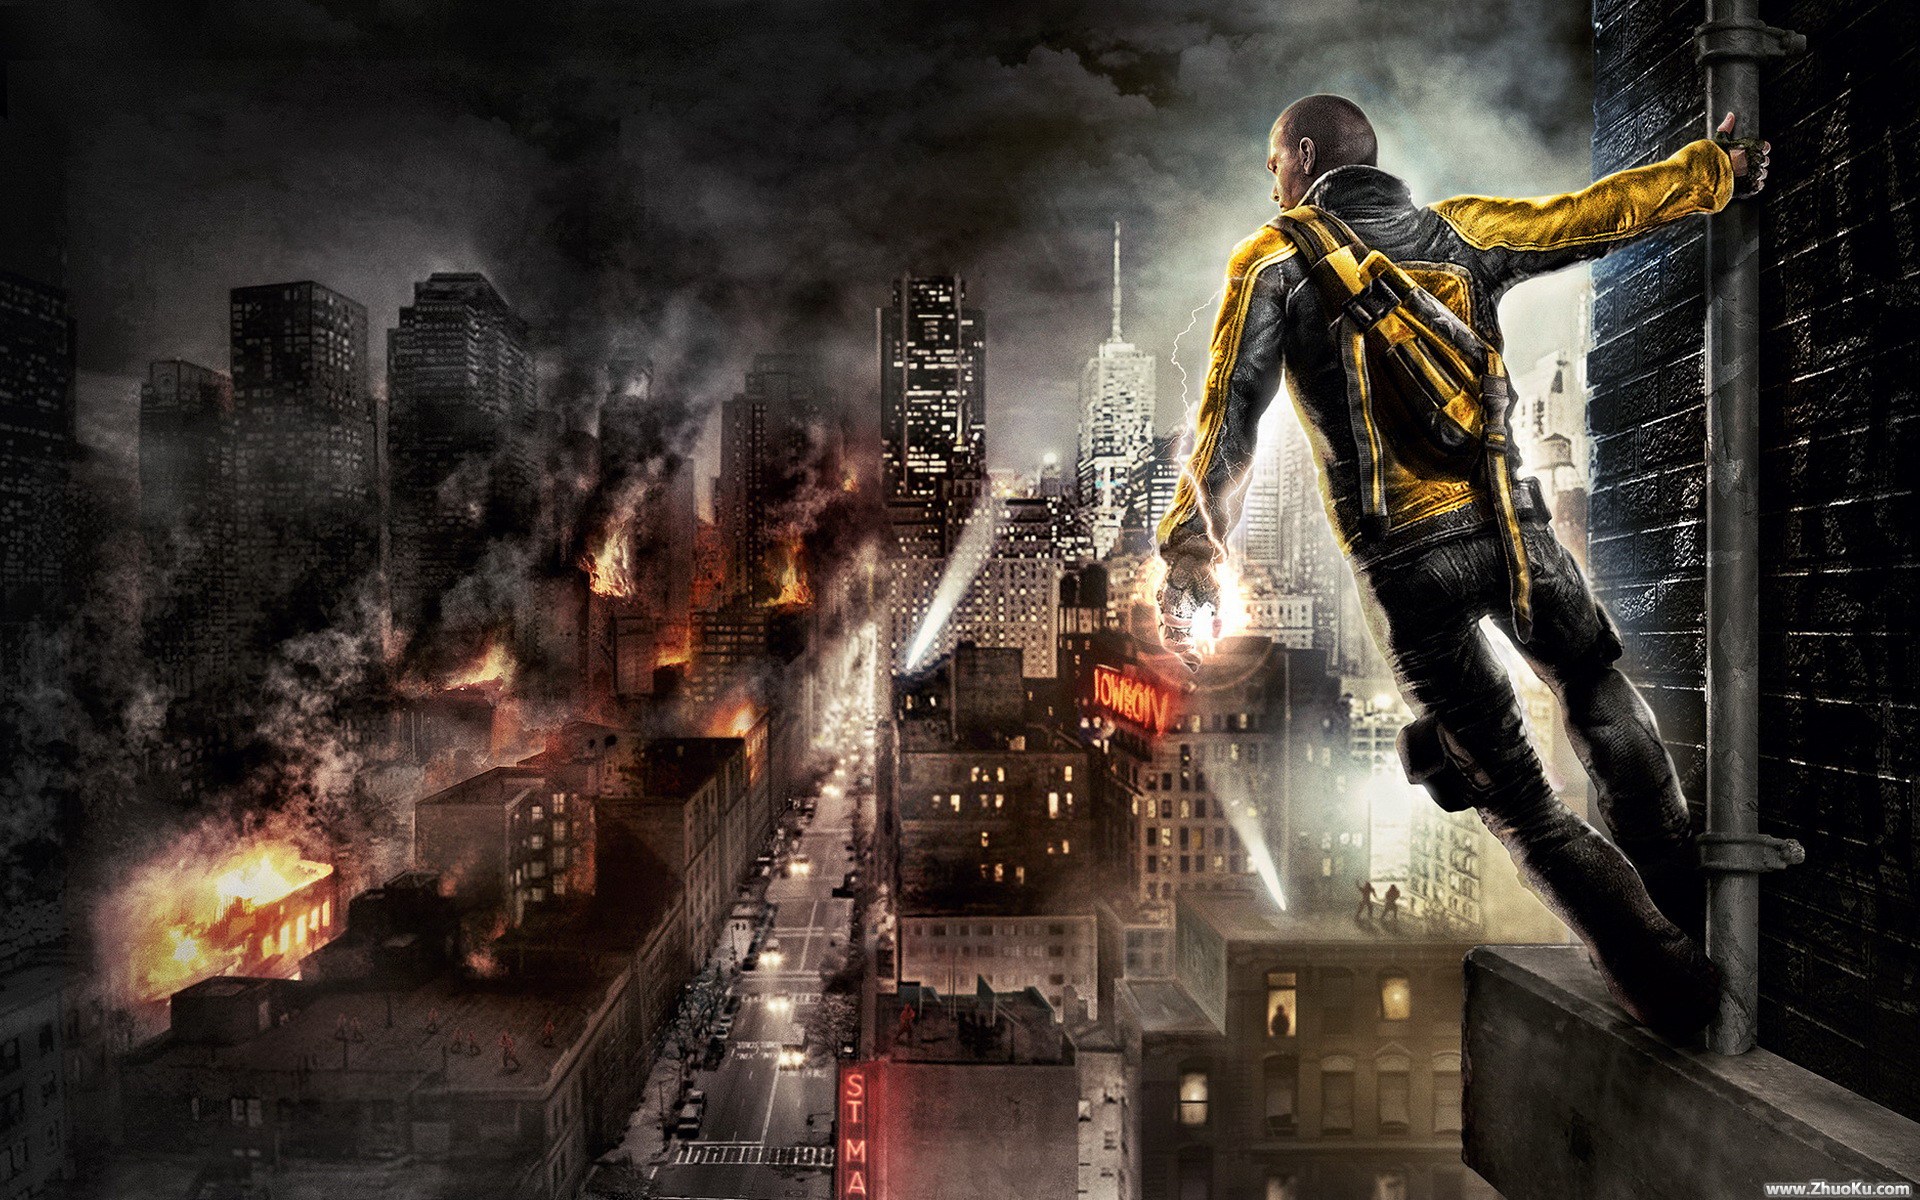 video game Infamous wallpaper video game Infamous picture 1920x1200